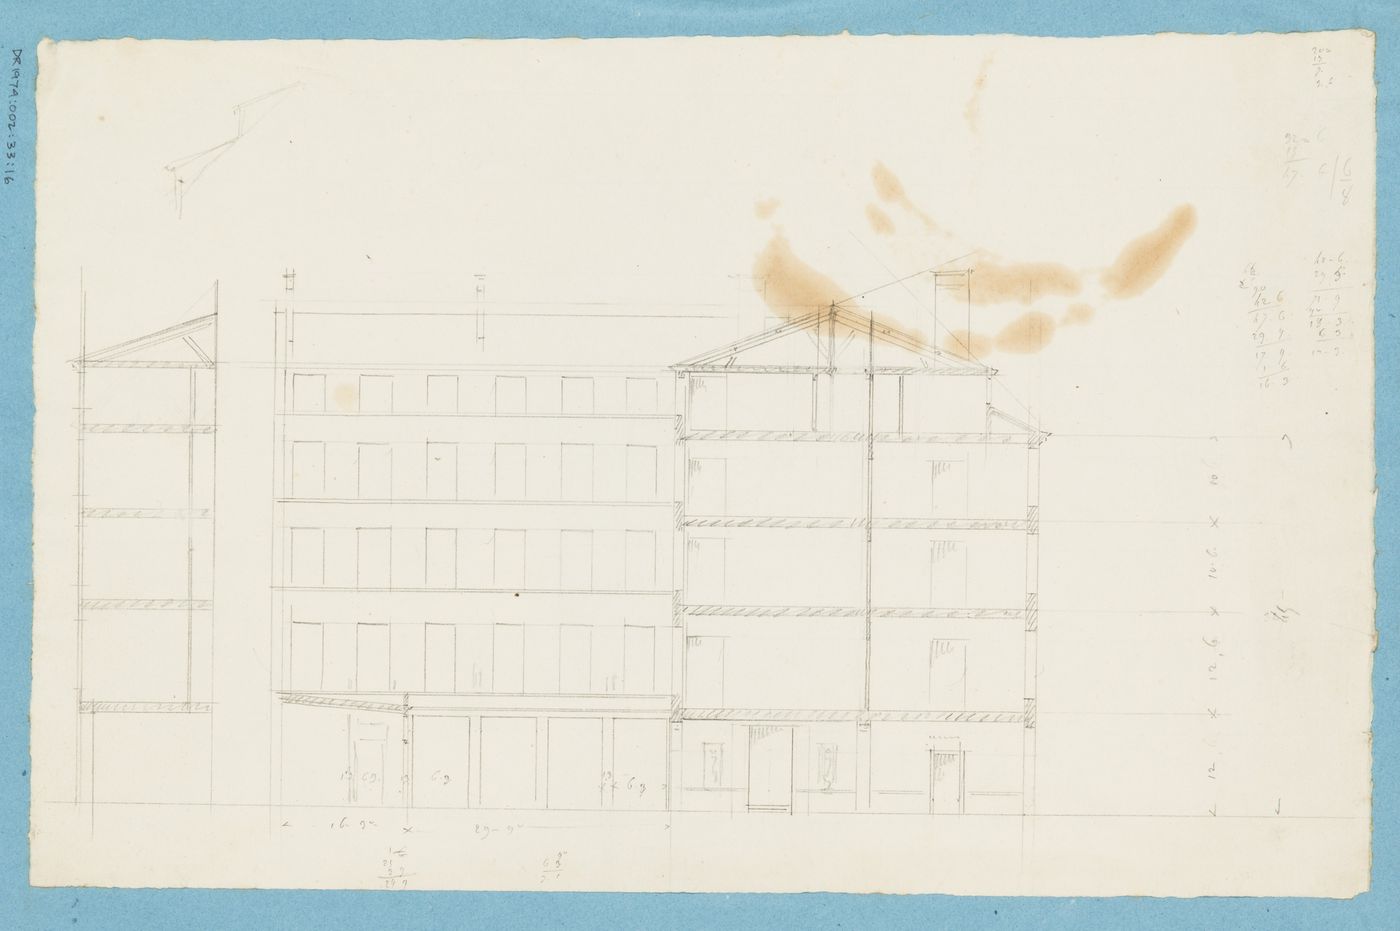 Project for a hôtel for M. Busche: Sectional elevation and partial section for a five-storey hôtel